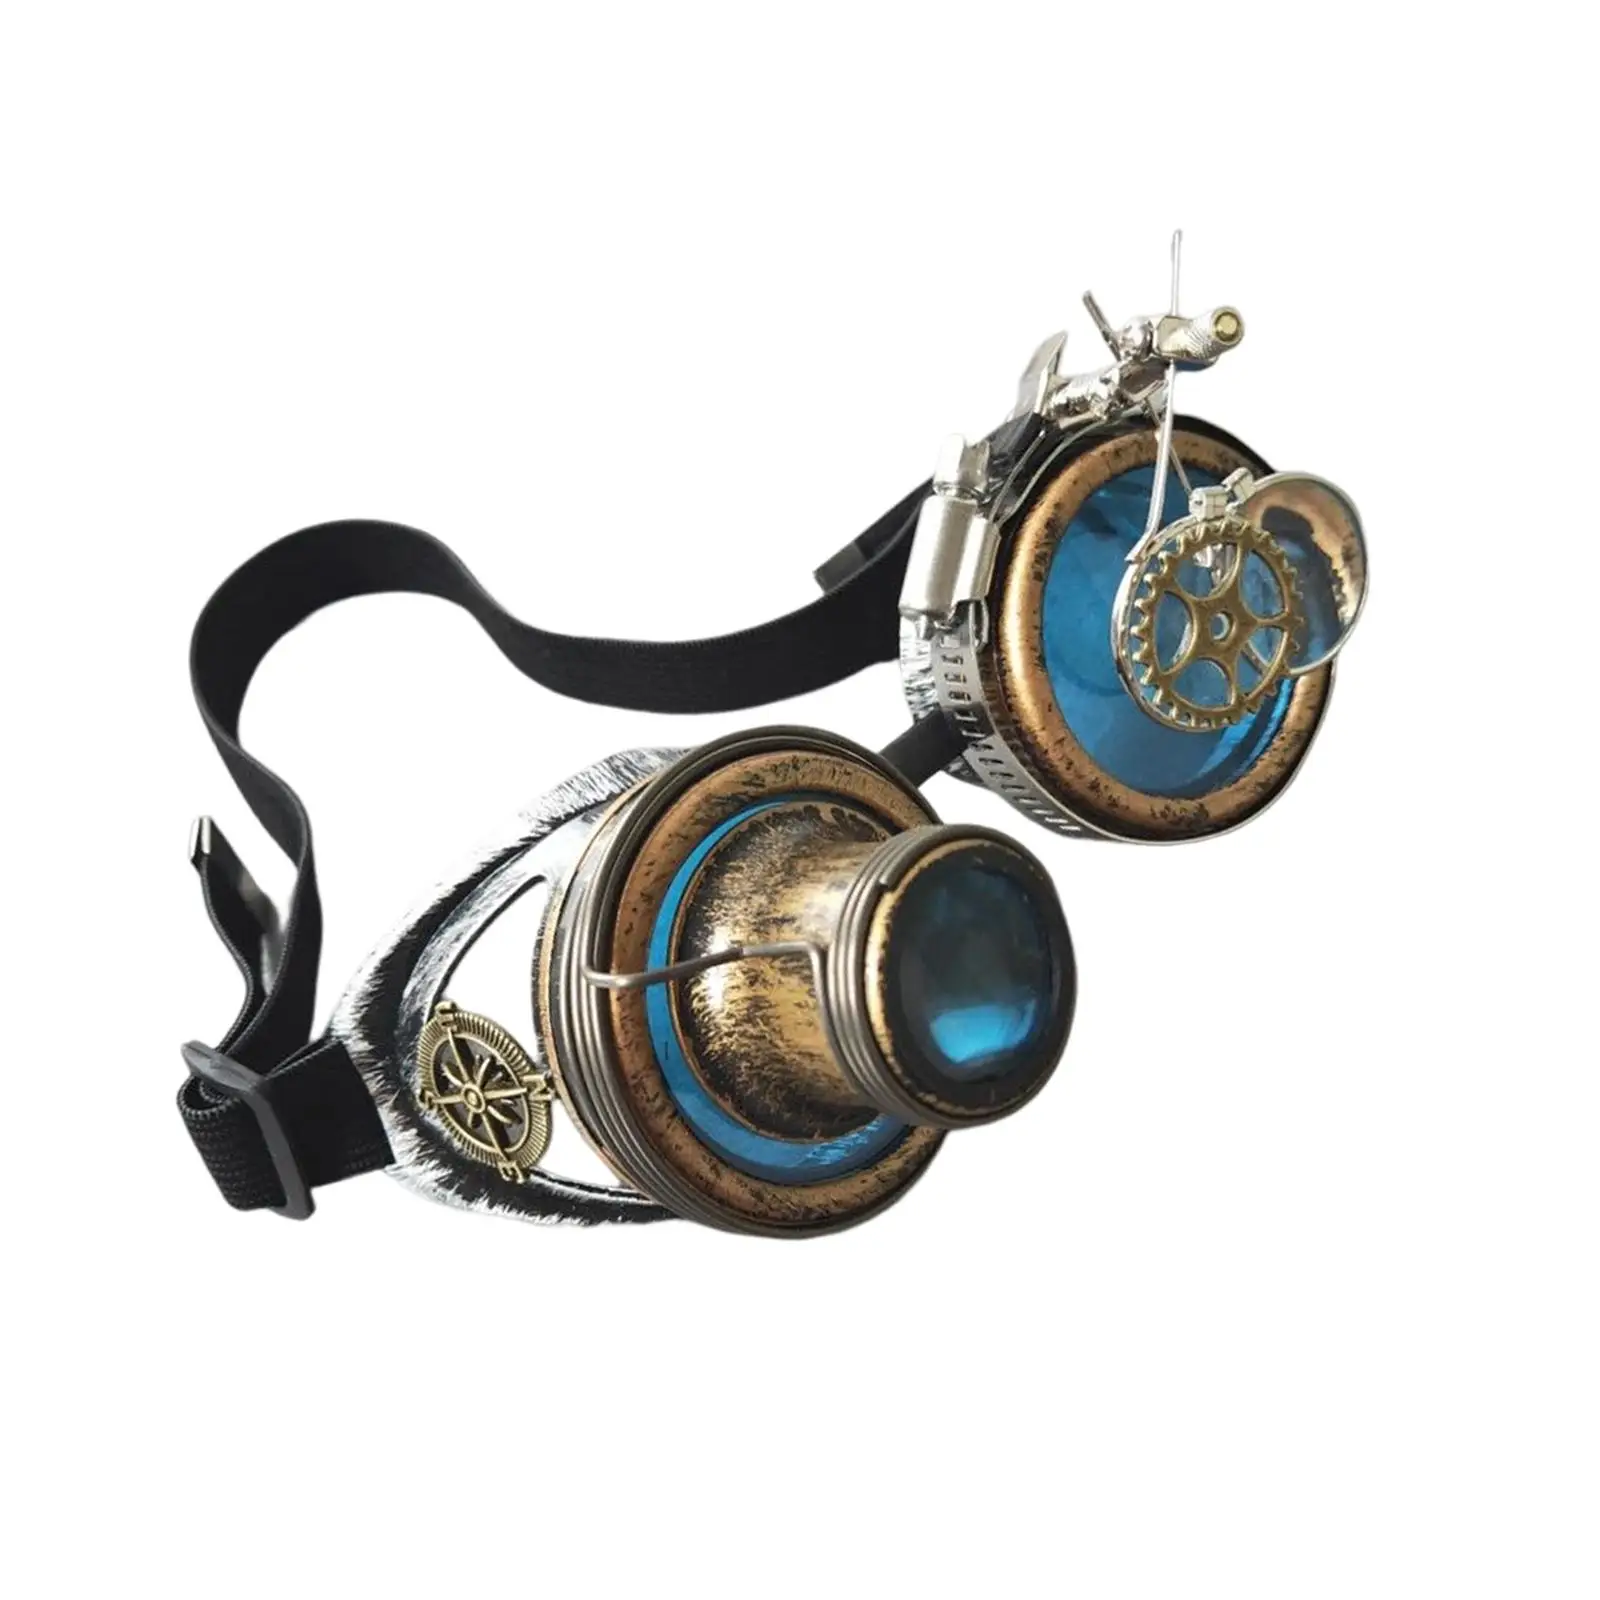 Fashion Steampunk Goggles Colored Rustic Women Accessories Gothic Punk Ocular Loupe Sun Glasses for Props Eyewear Cosplay